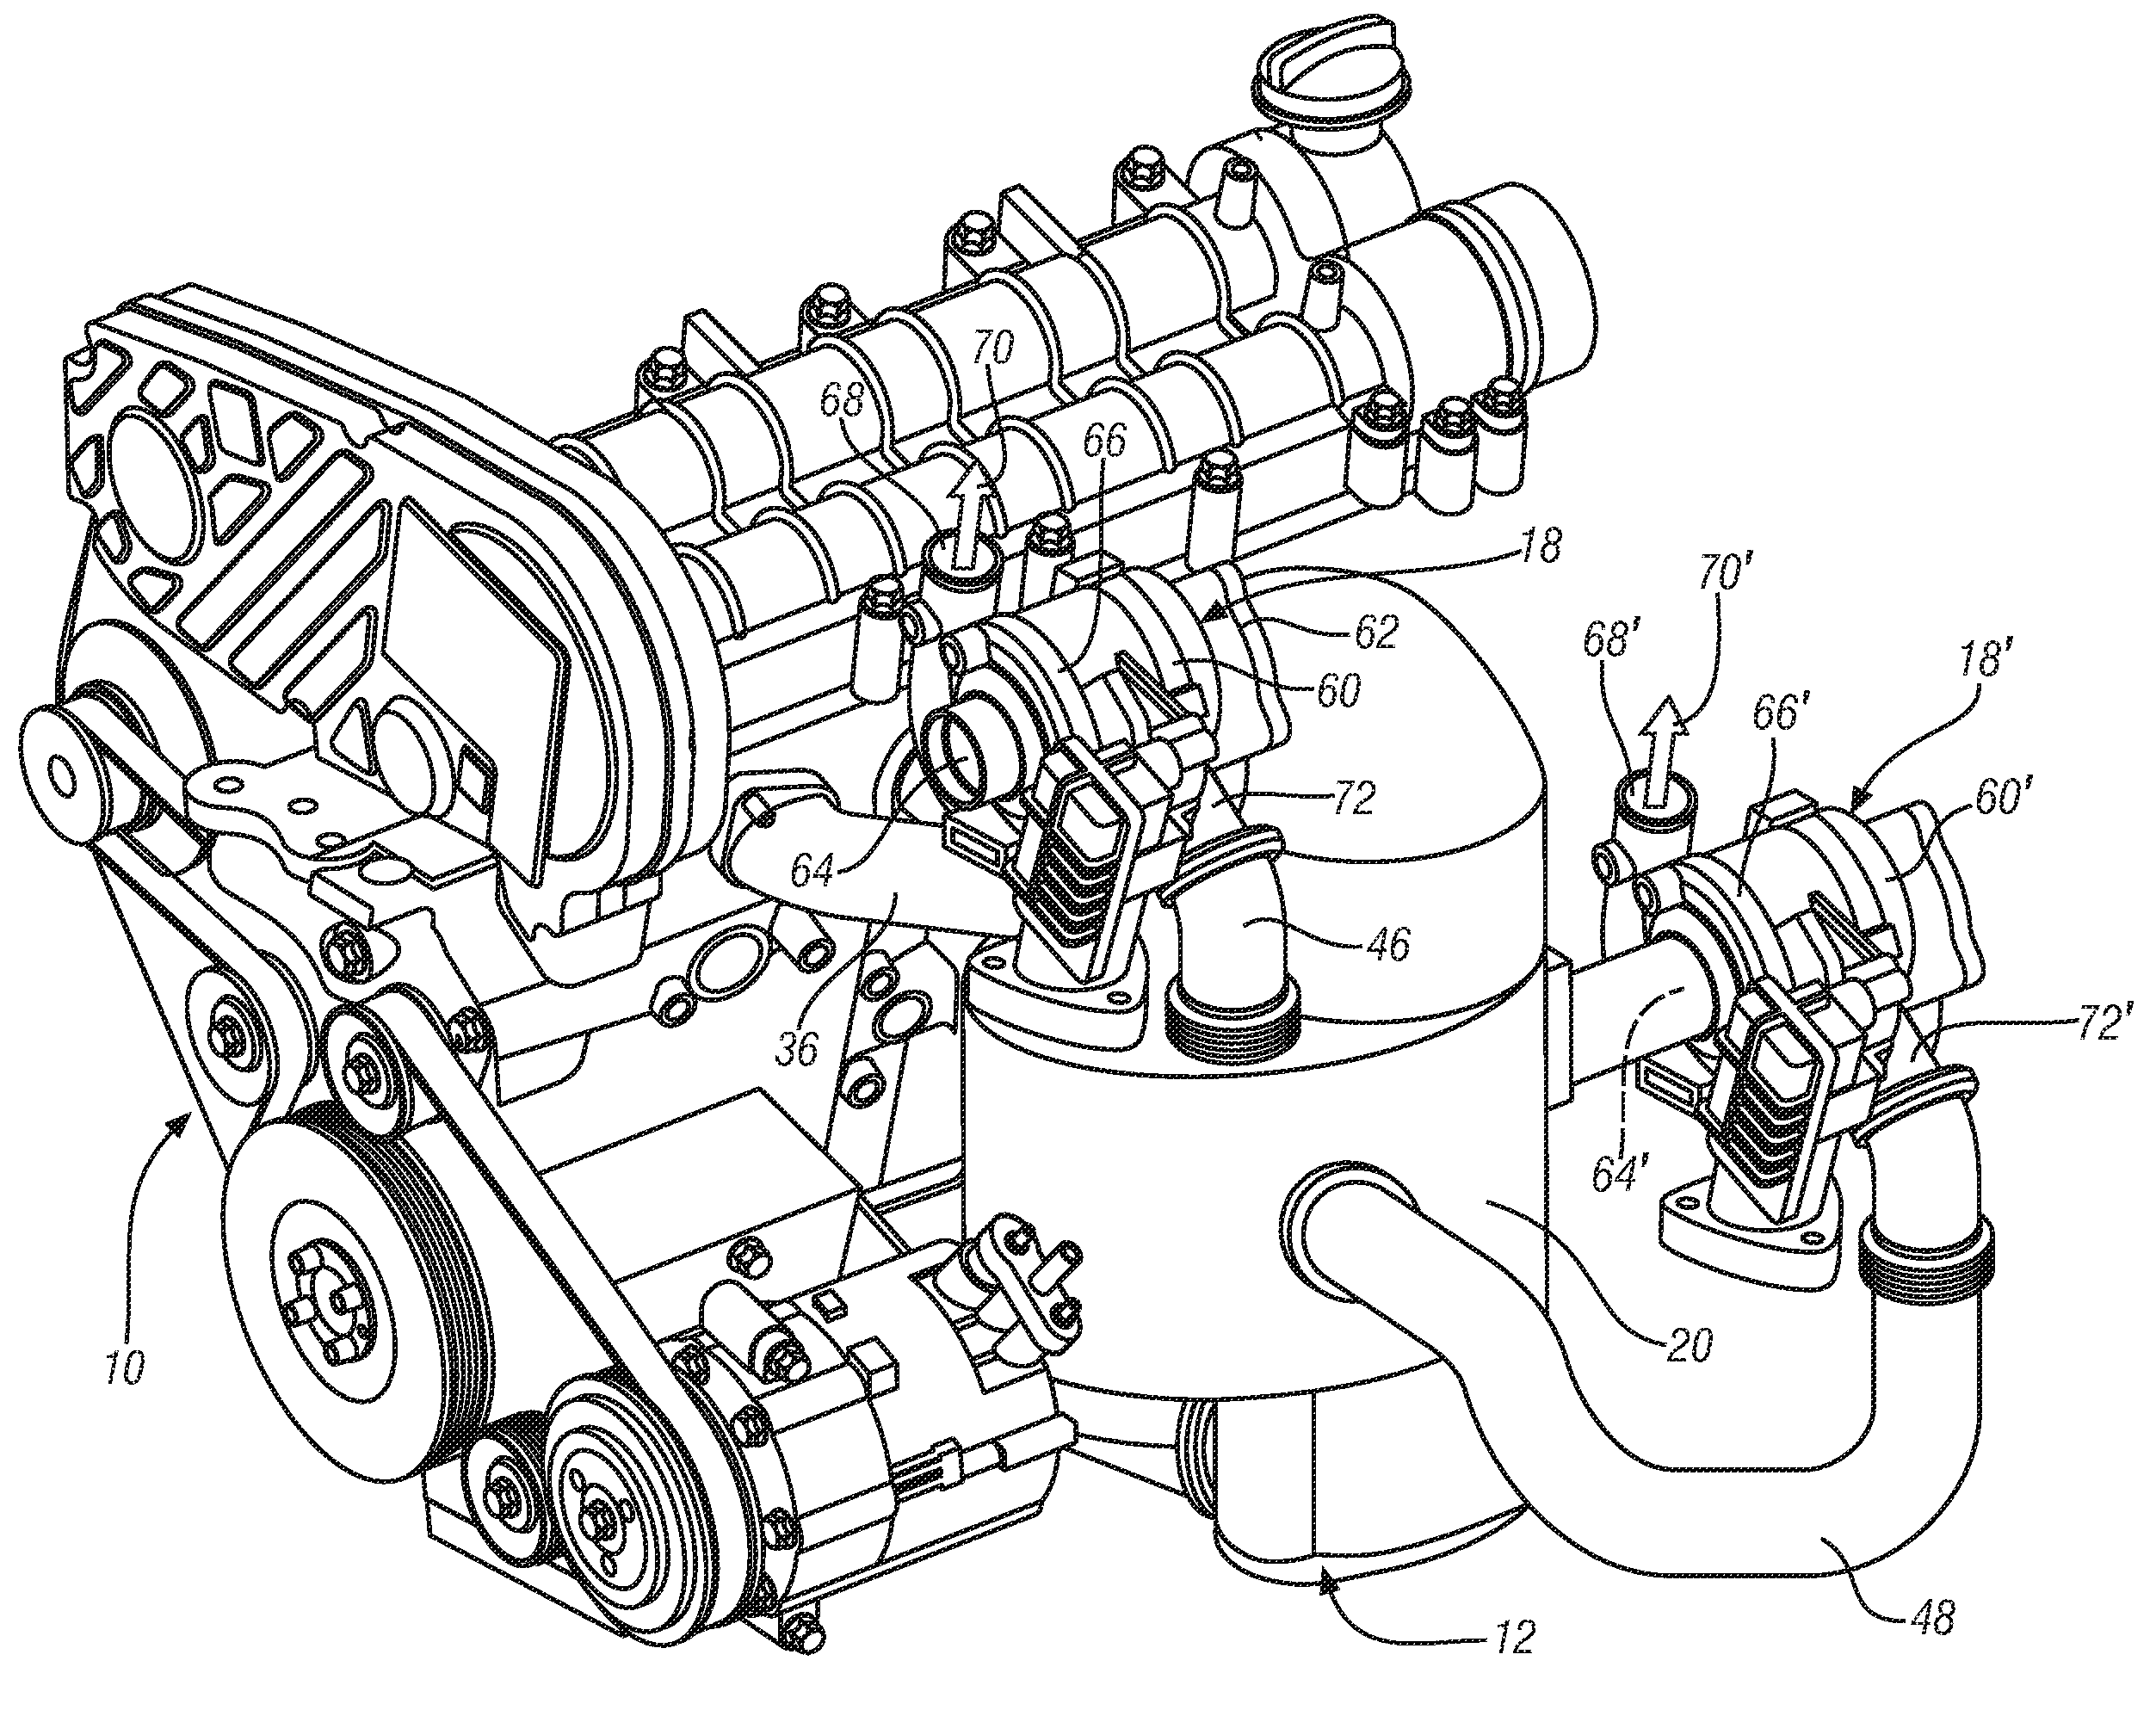 Closely coupled exhaust aftertreatment system for an internal combustion engine having twin turbochargers